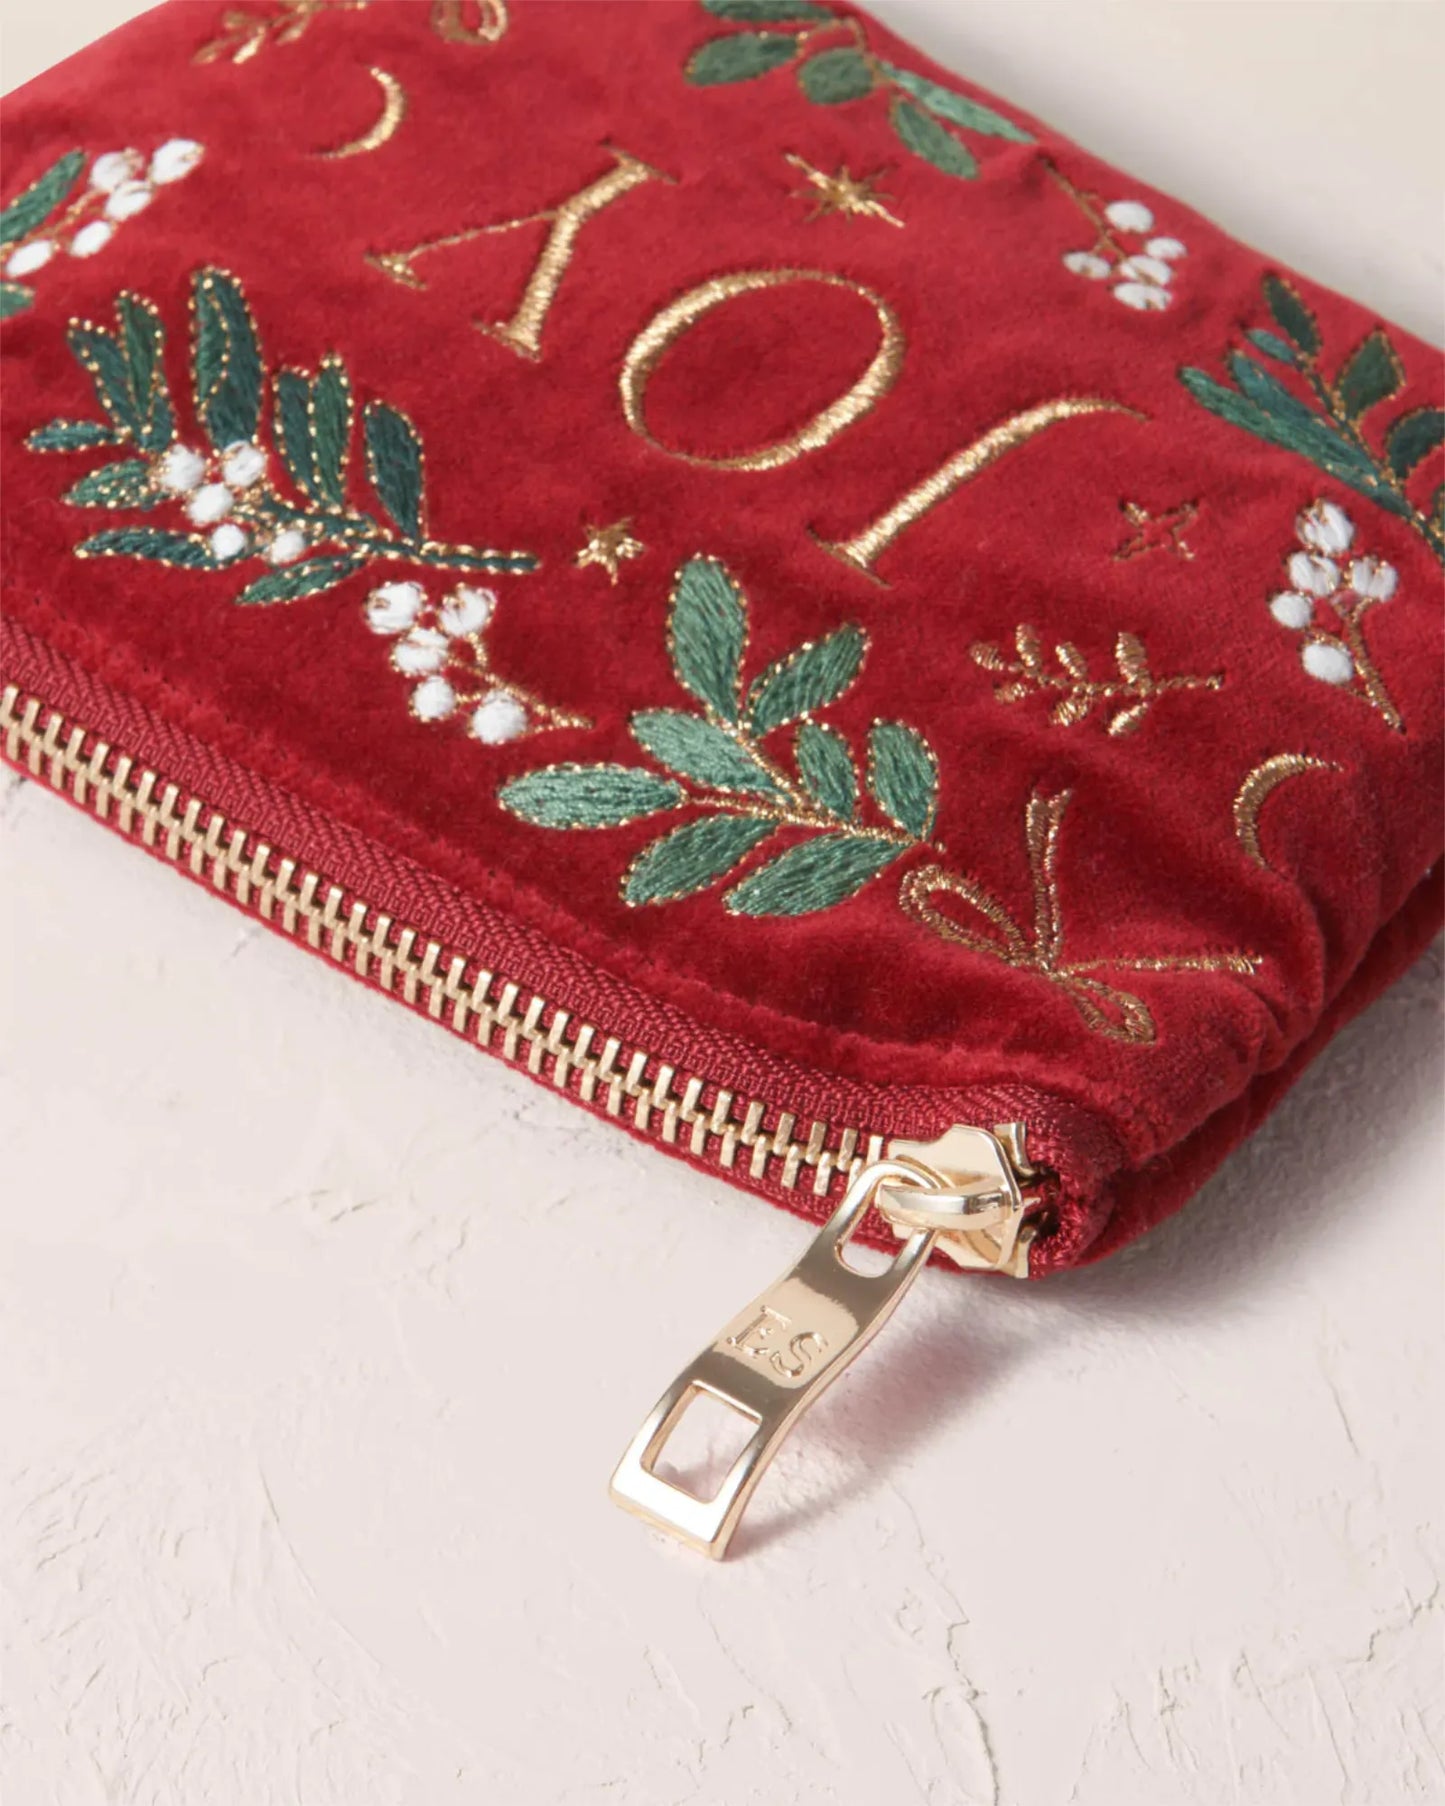 Give Joy Coin Purse - Rouge